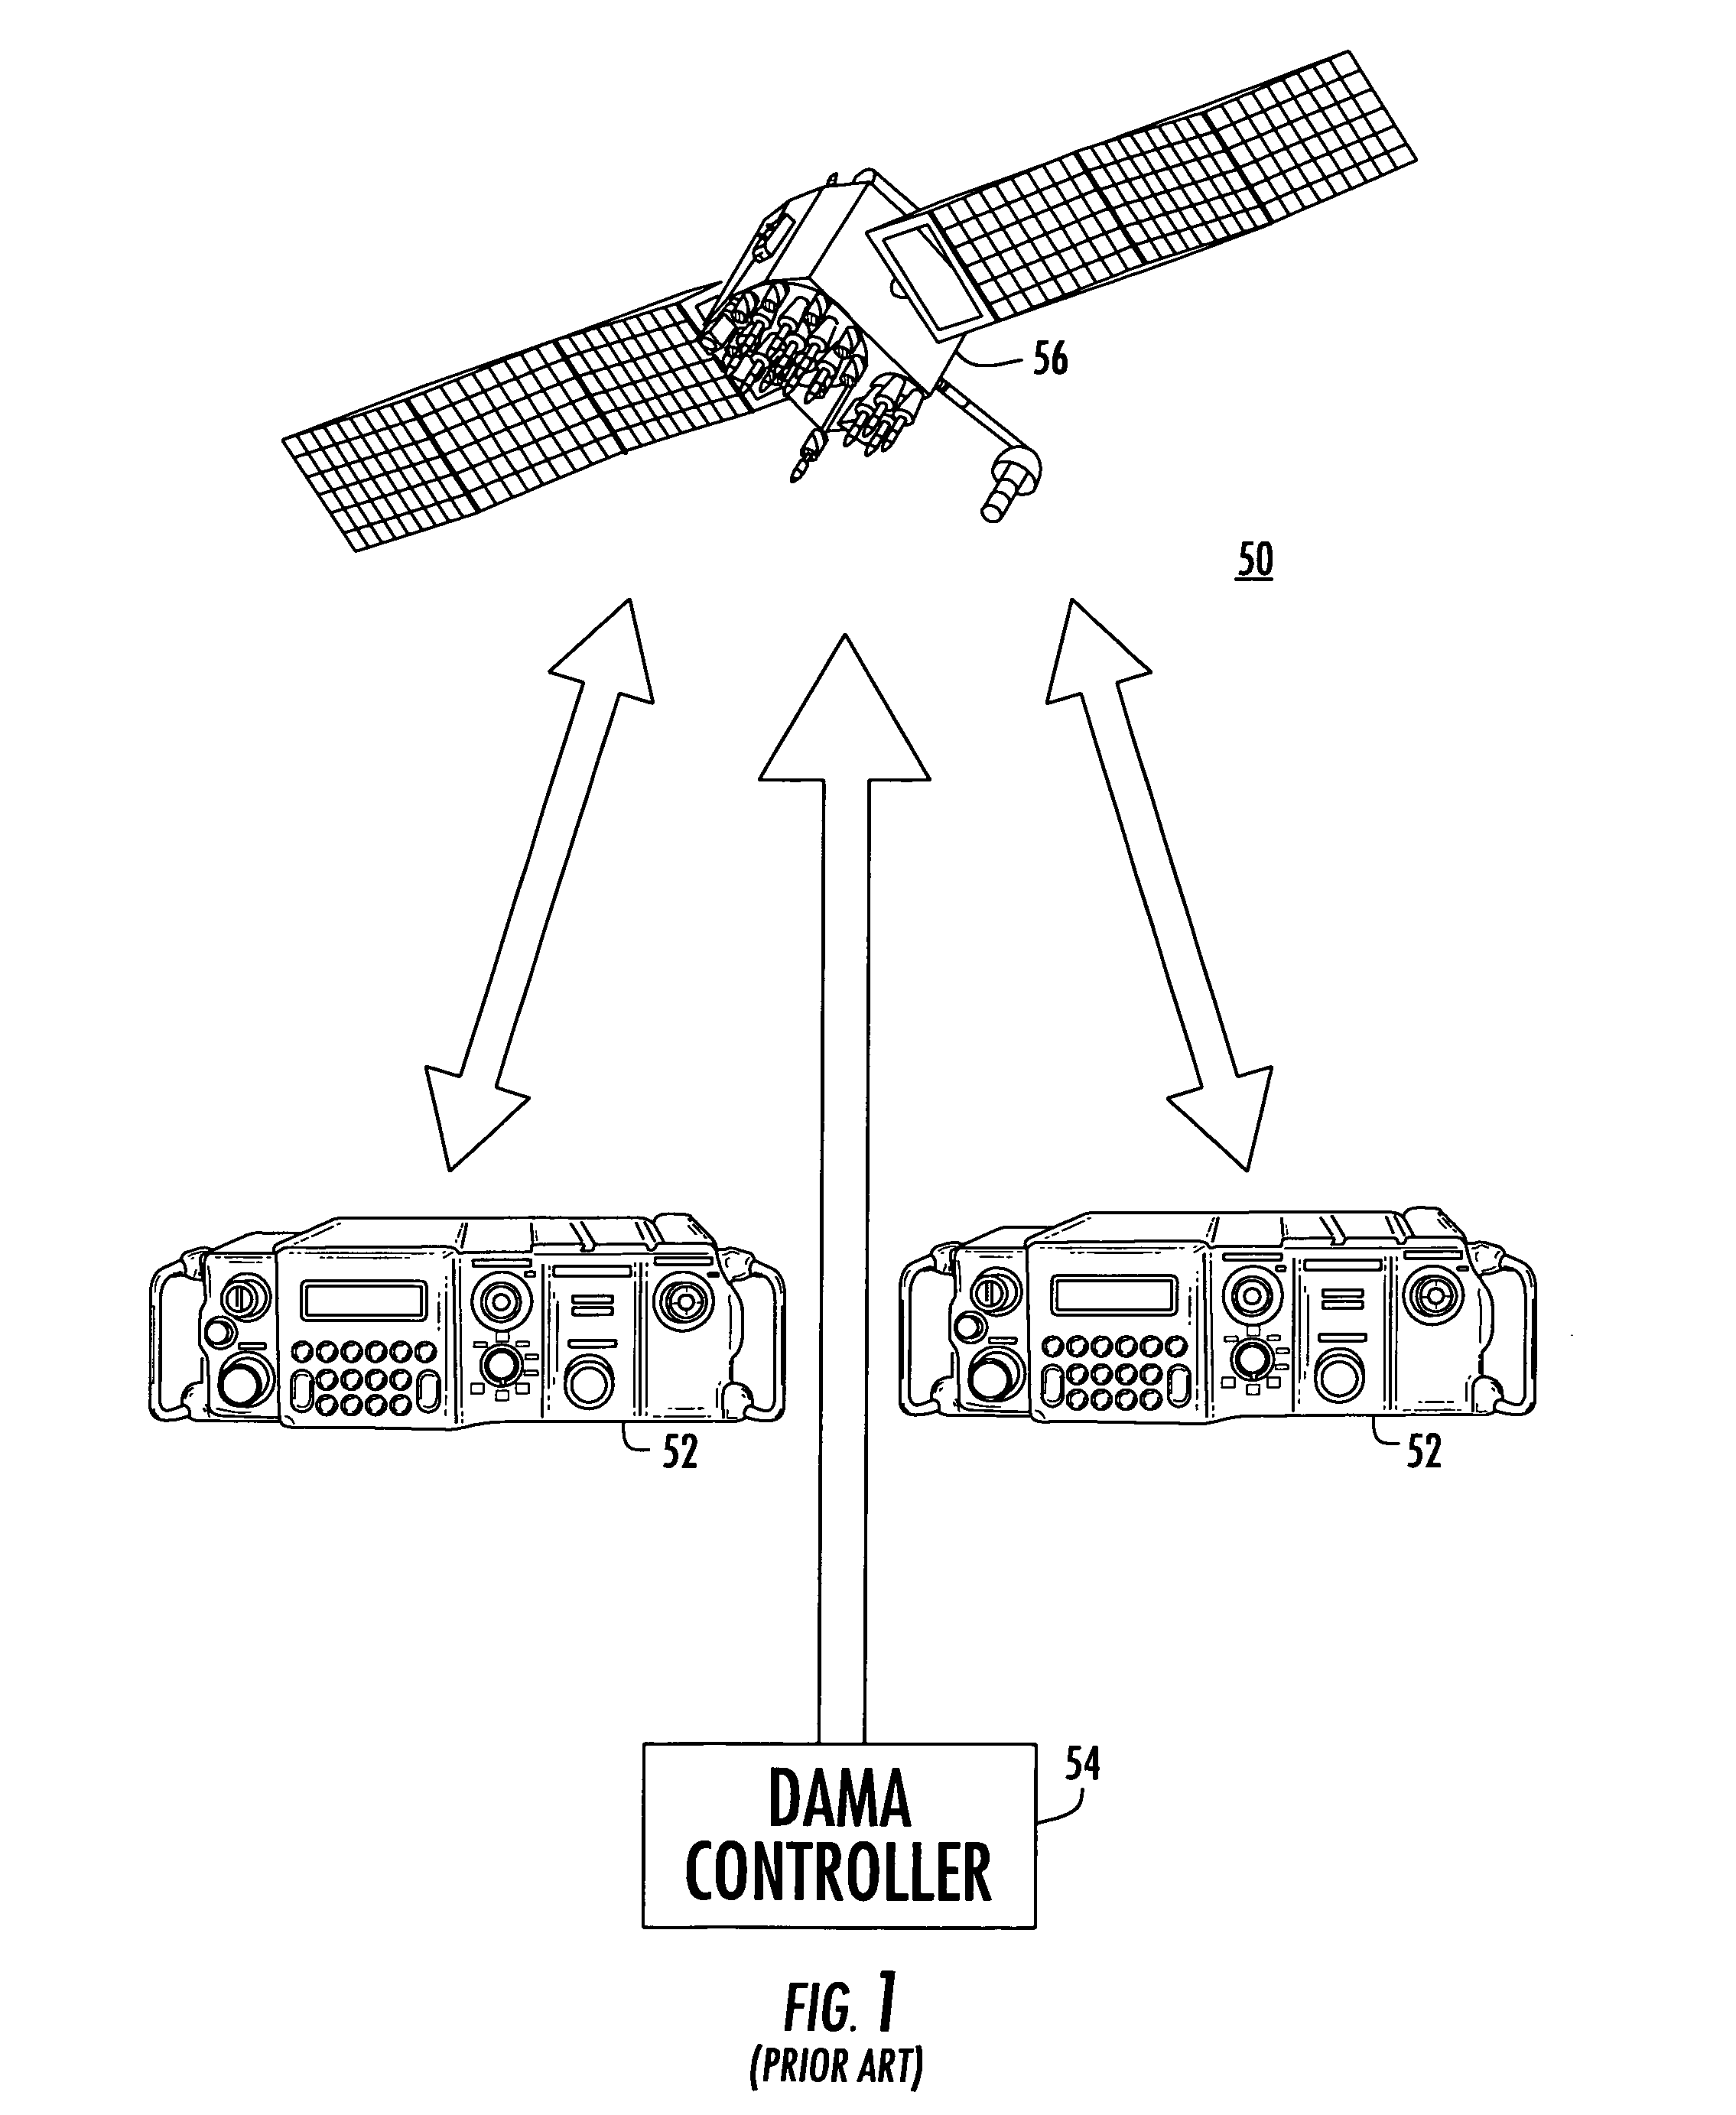 Demand-assigned multiple access (DAMA) communication device and associated acquisition methods